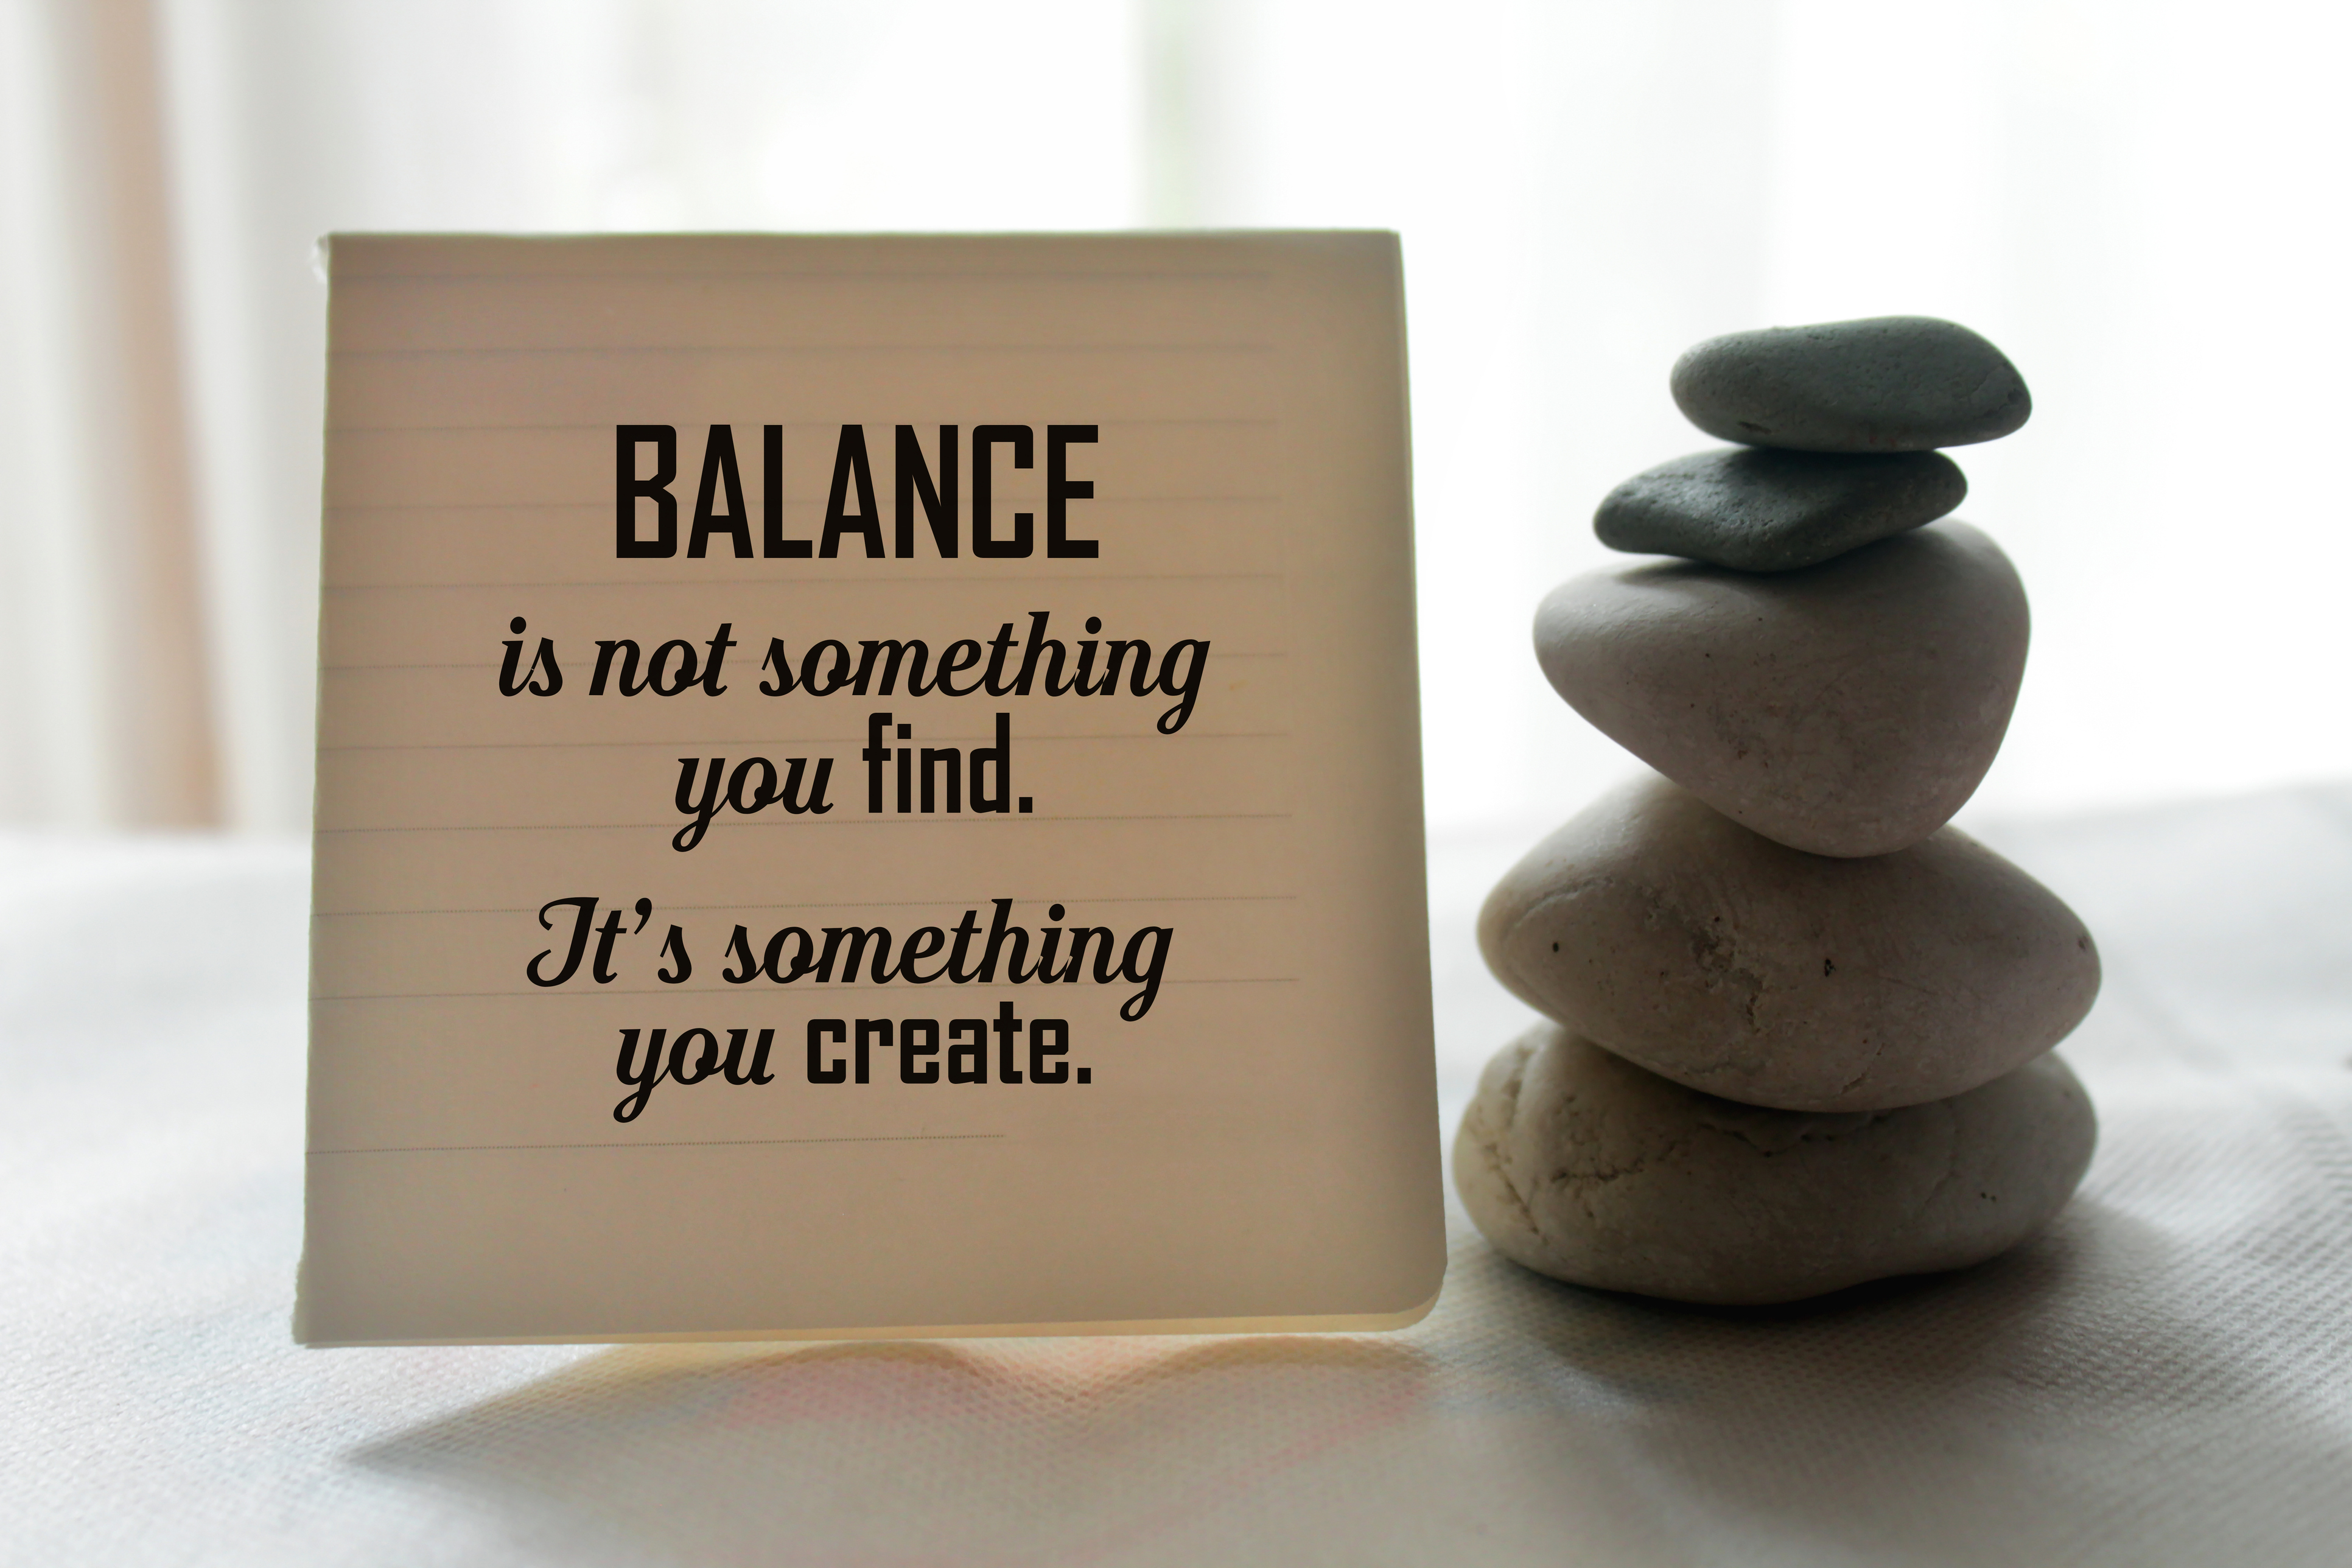 TW1122_balance-is-not-something-you-find.jpg